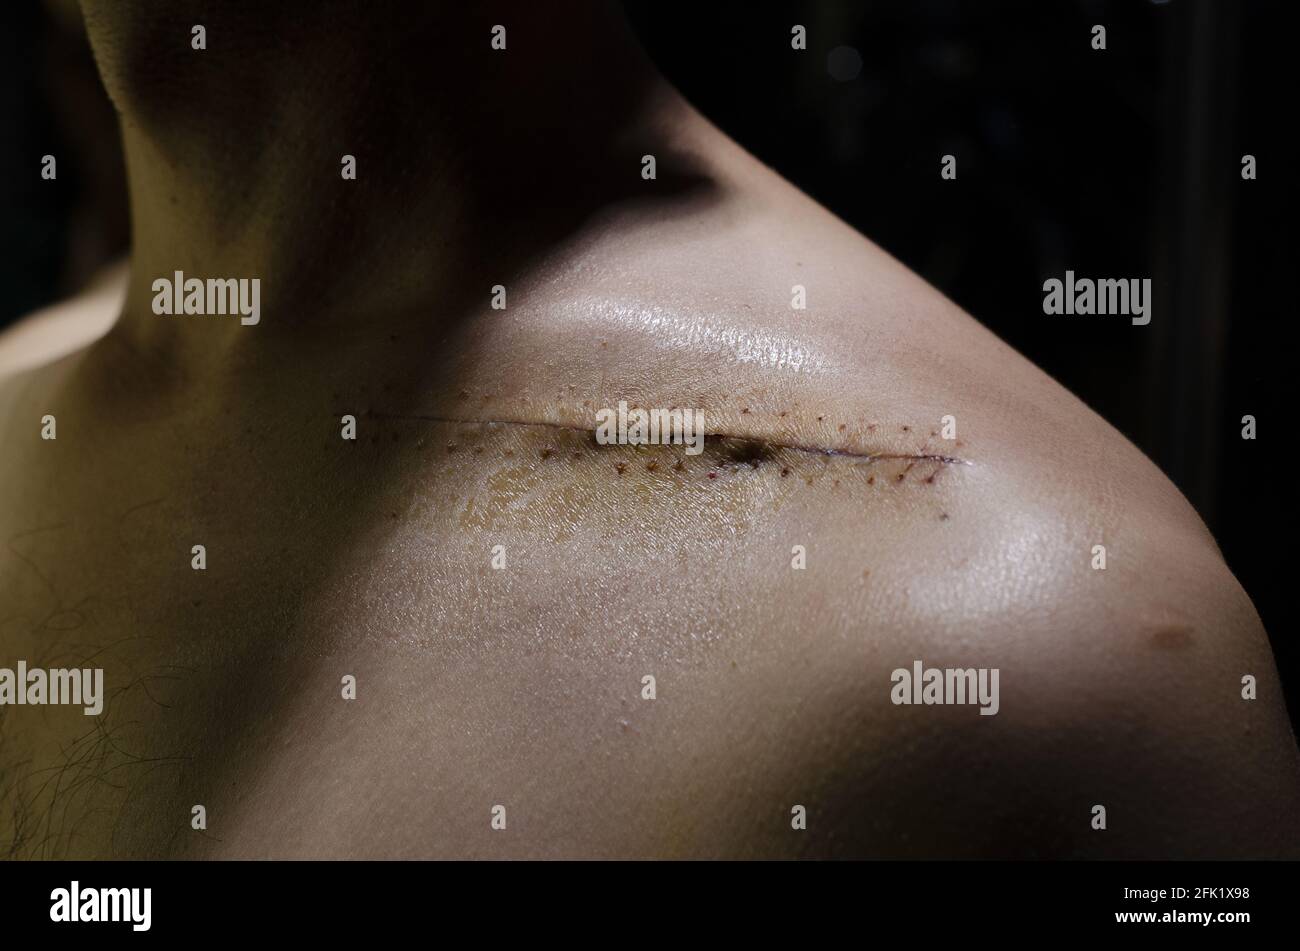 Closeup of stitches on man's collarbone isolated on black background Stock Photo